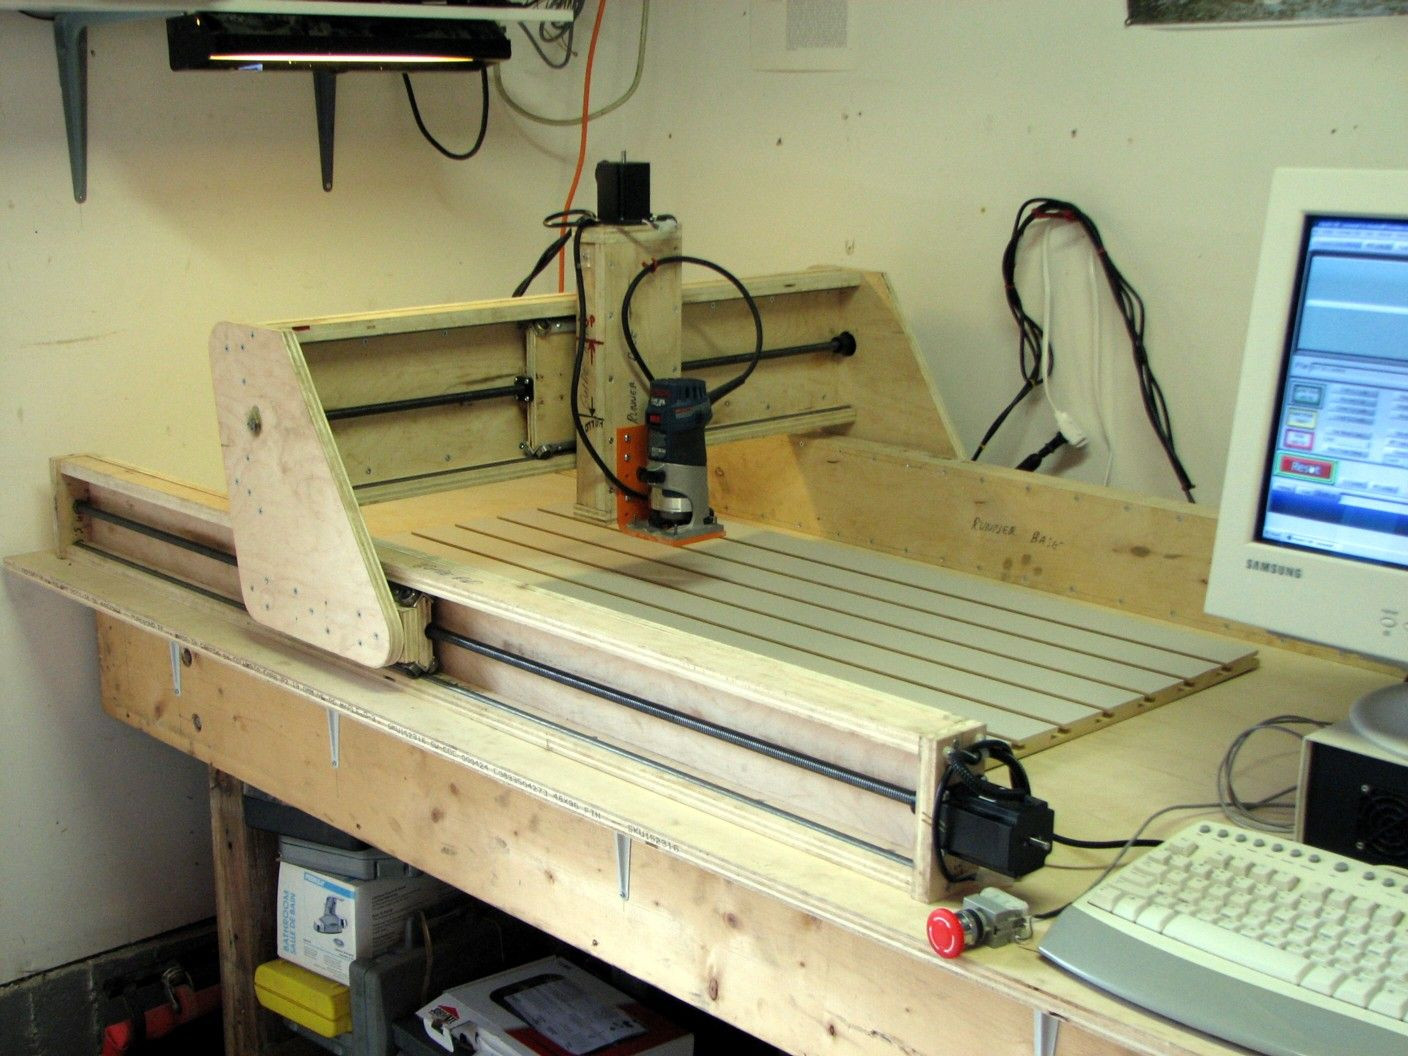 DIY Cnc Router Plan
 Our CNC Router Plans will guide you to build a CNC Router